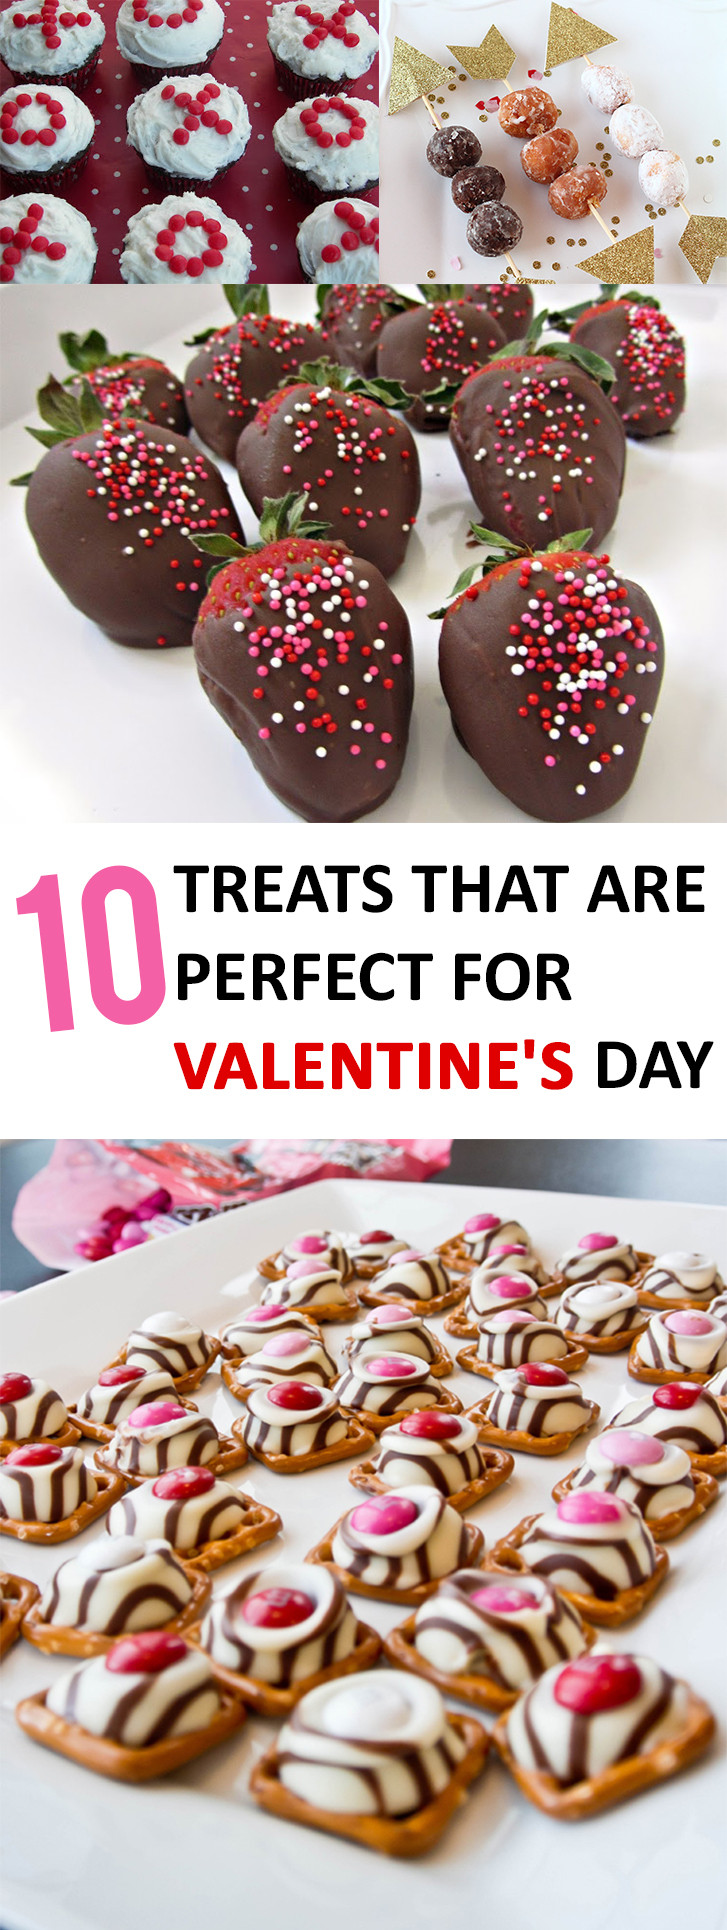 Valentine'S Day Treats &amp; Diy Gift Ideas
 10 Treats that are Perfect for Valentine’s Day